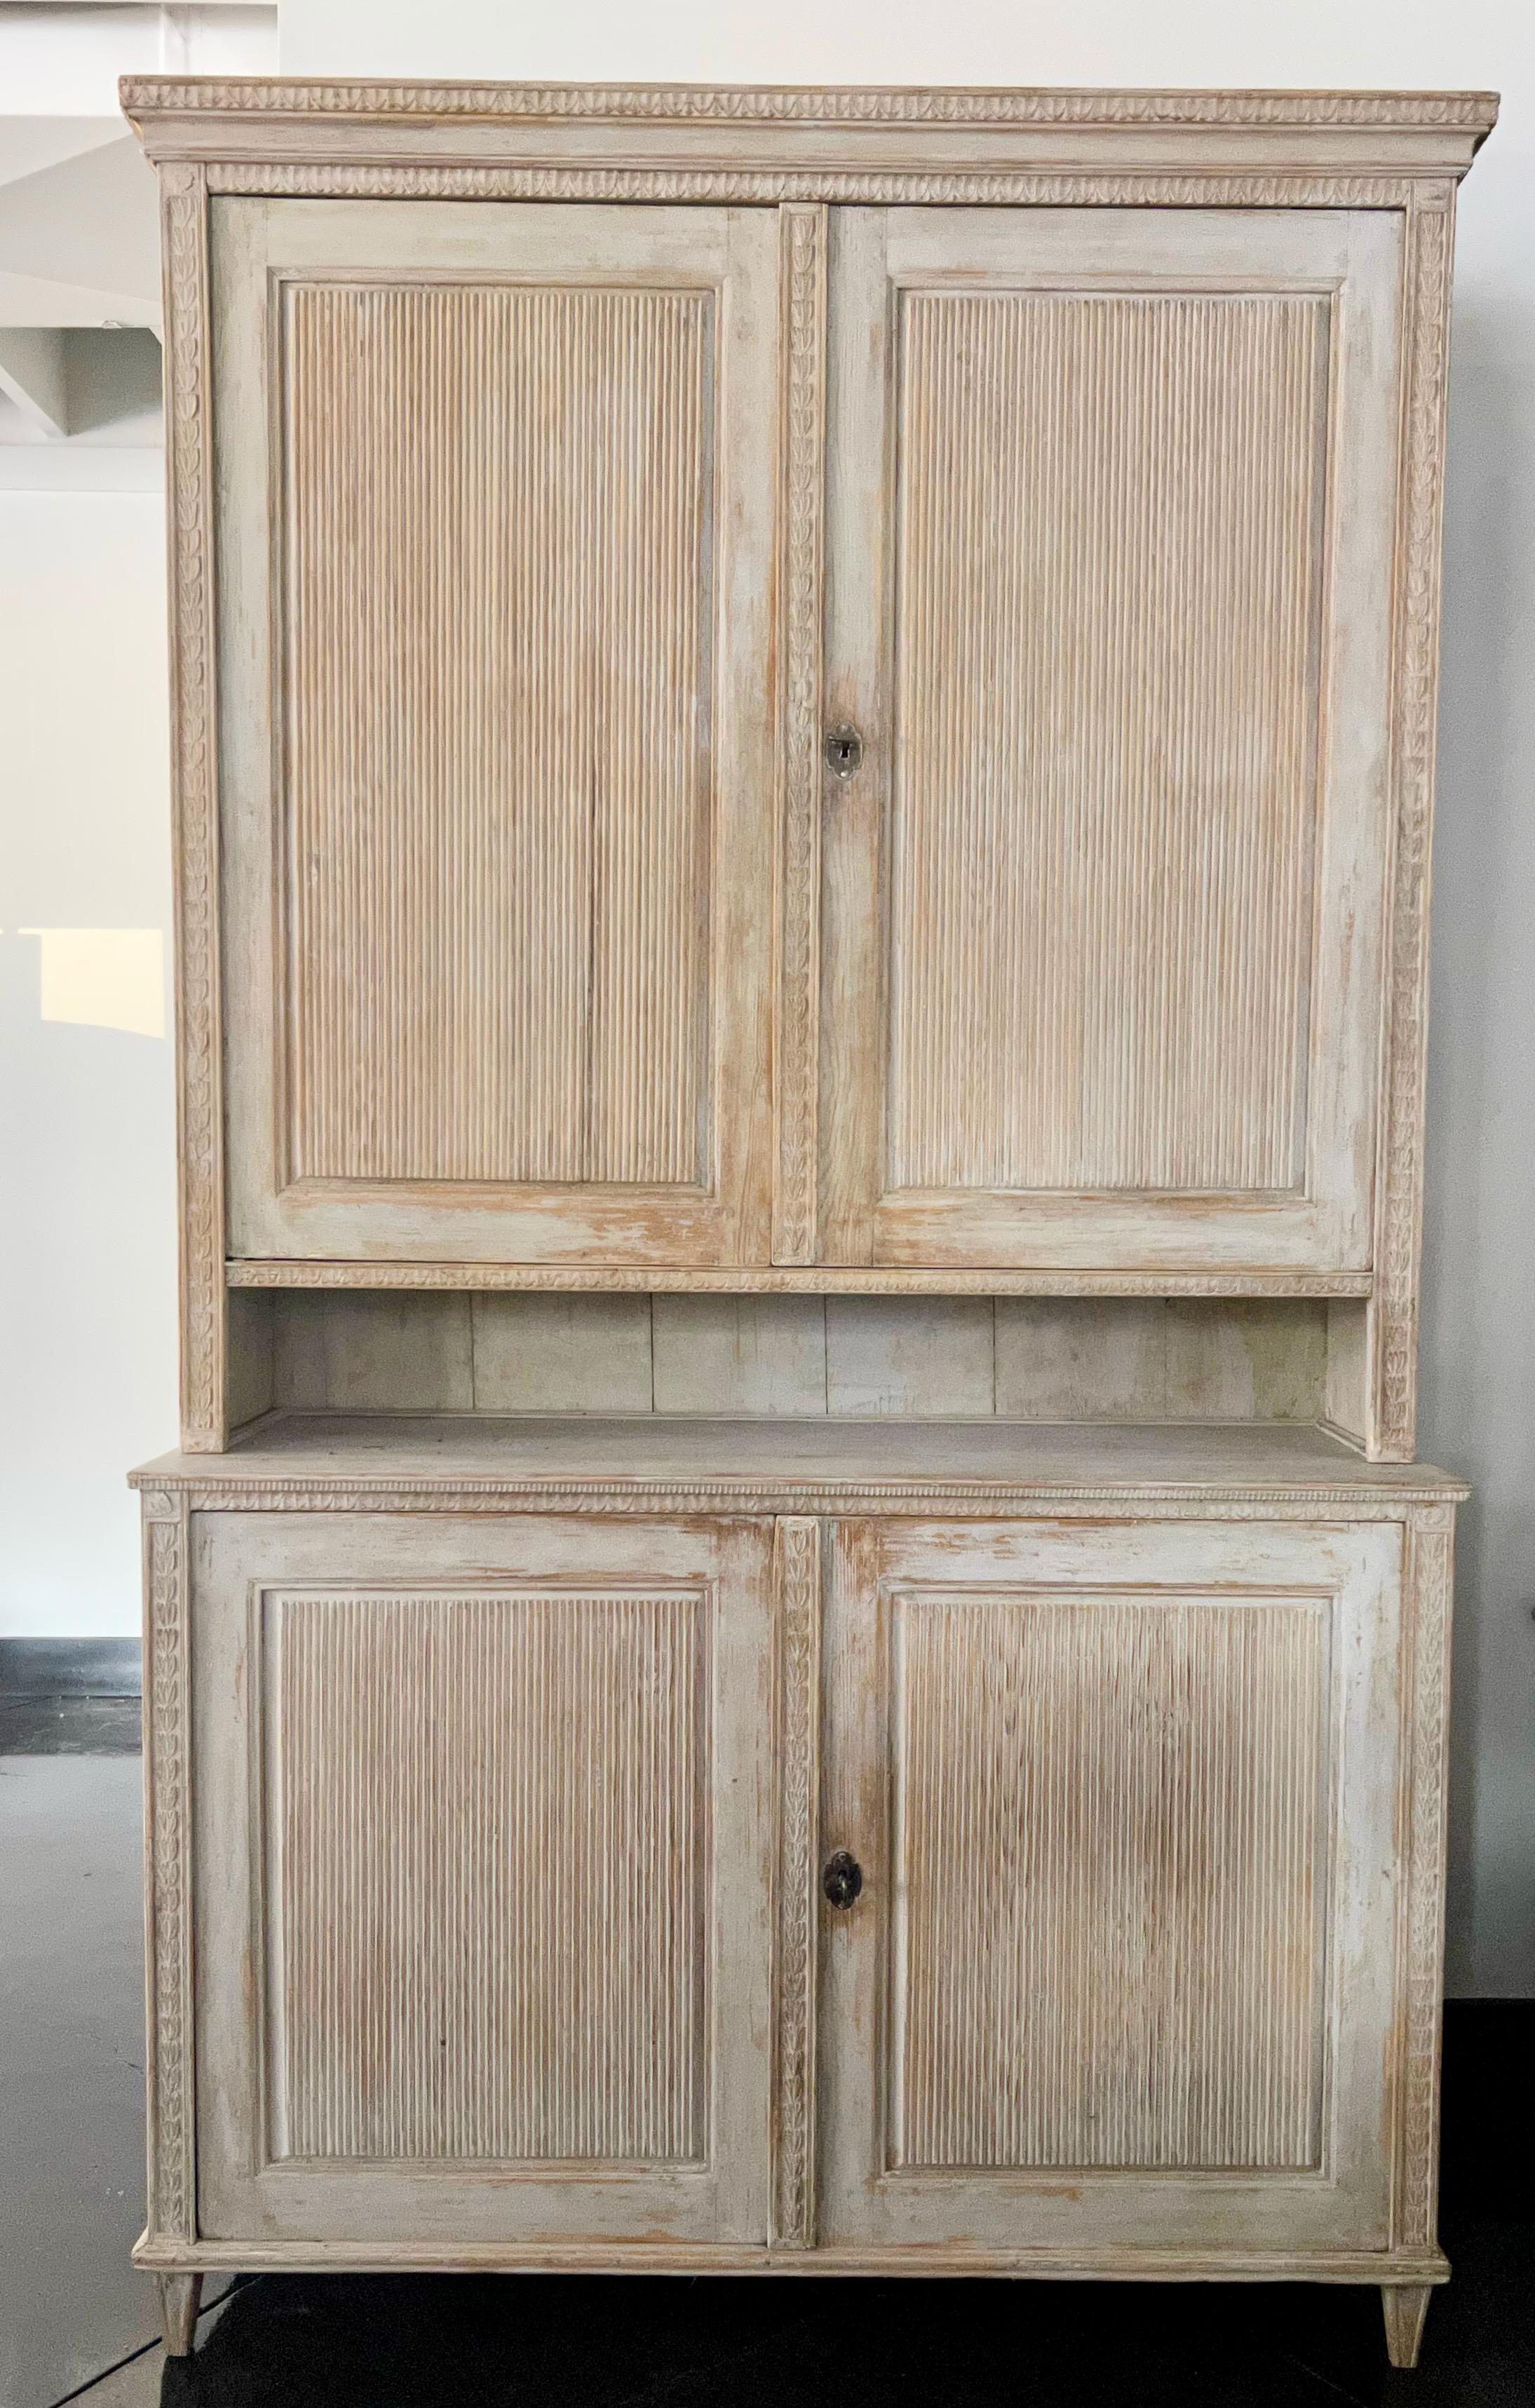 An exquisite carved and large period Swedish Gustavian cabinet, in two parts displays Classic Gustavian styling with reeded door panels in wonderful worn cream white patina. Very practical with plenty of storage.
Västerbotten, Sweden, circa